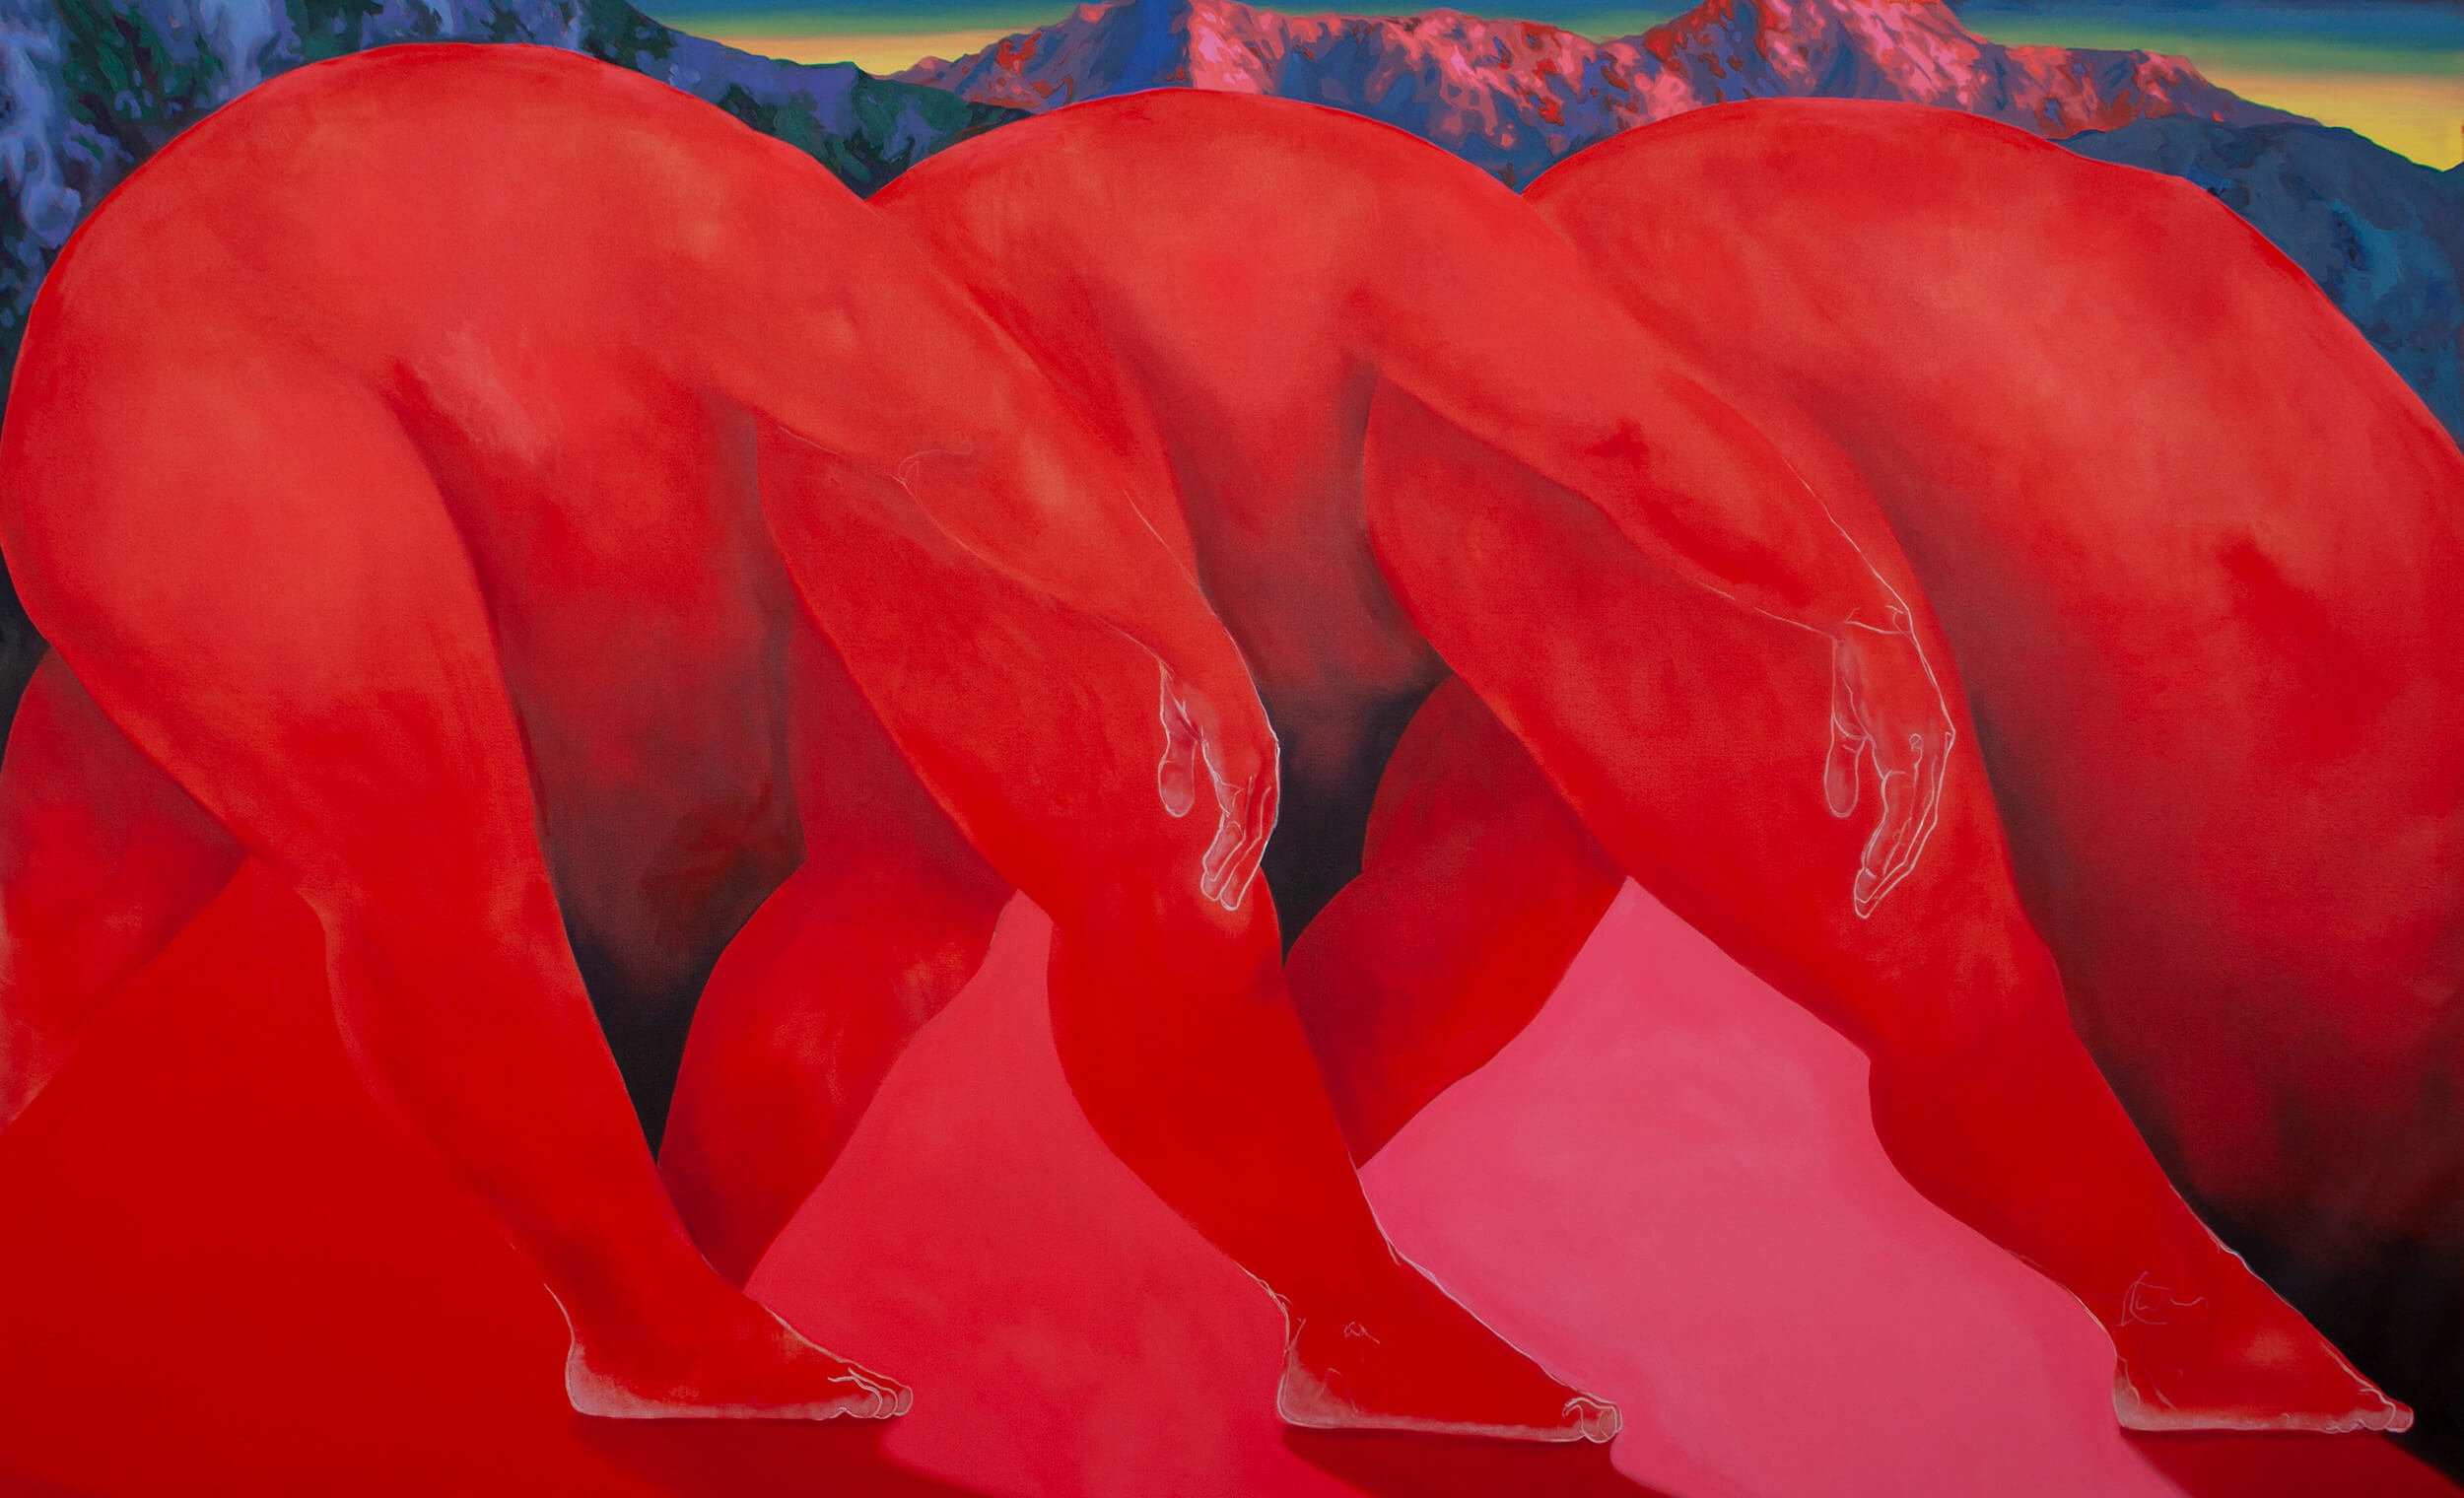 Brittney Leeanne Williams A Passing Dance, 2020 oil on canvas 54 x 89 in. (137.2 x 226.1 cm.)